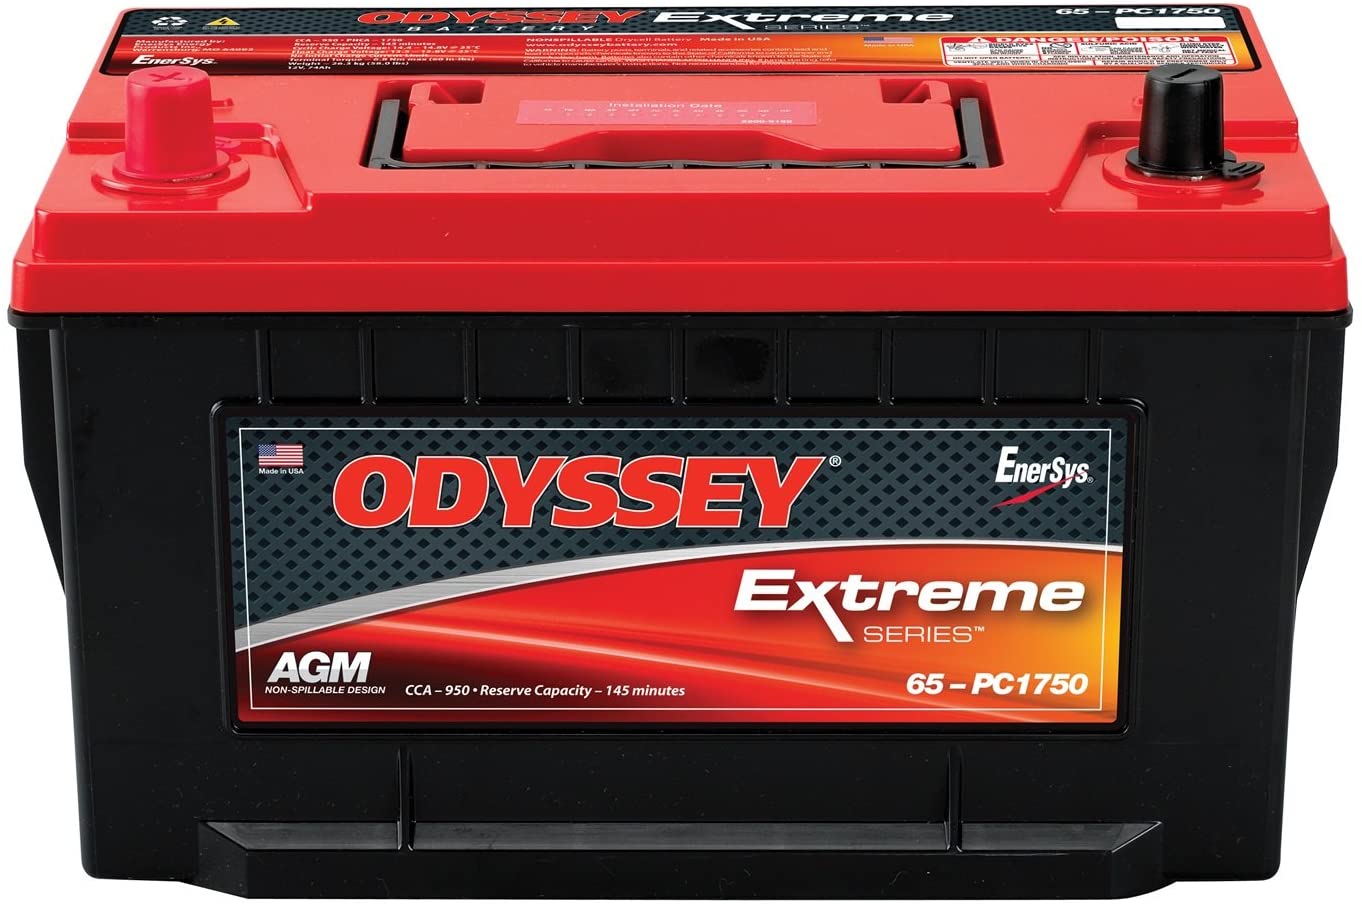 ODYSSEY Extreme Series 65-PC1750T